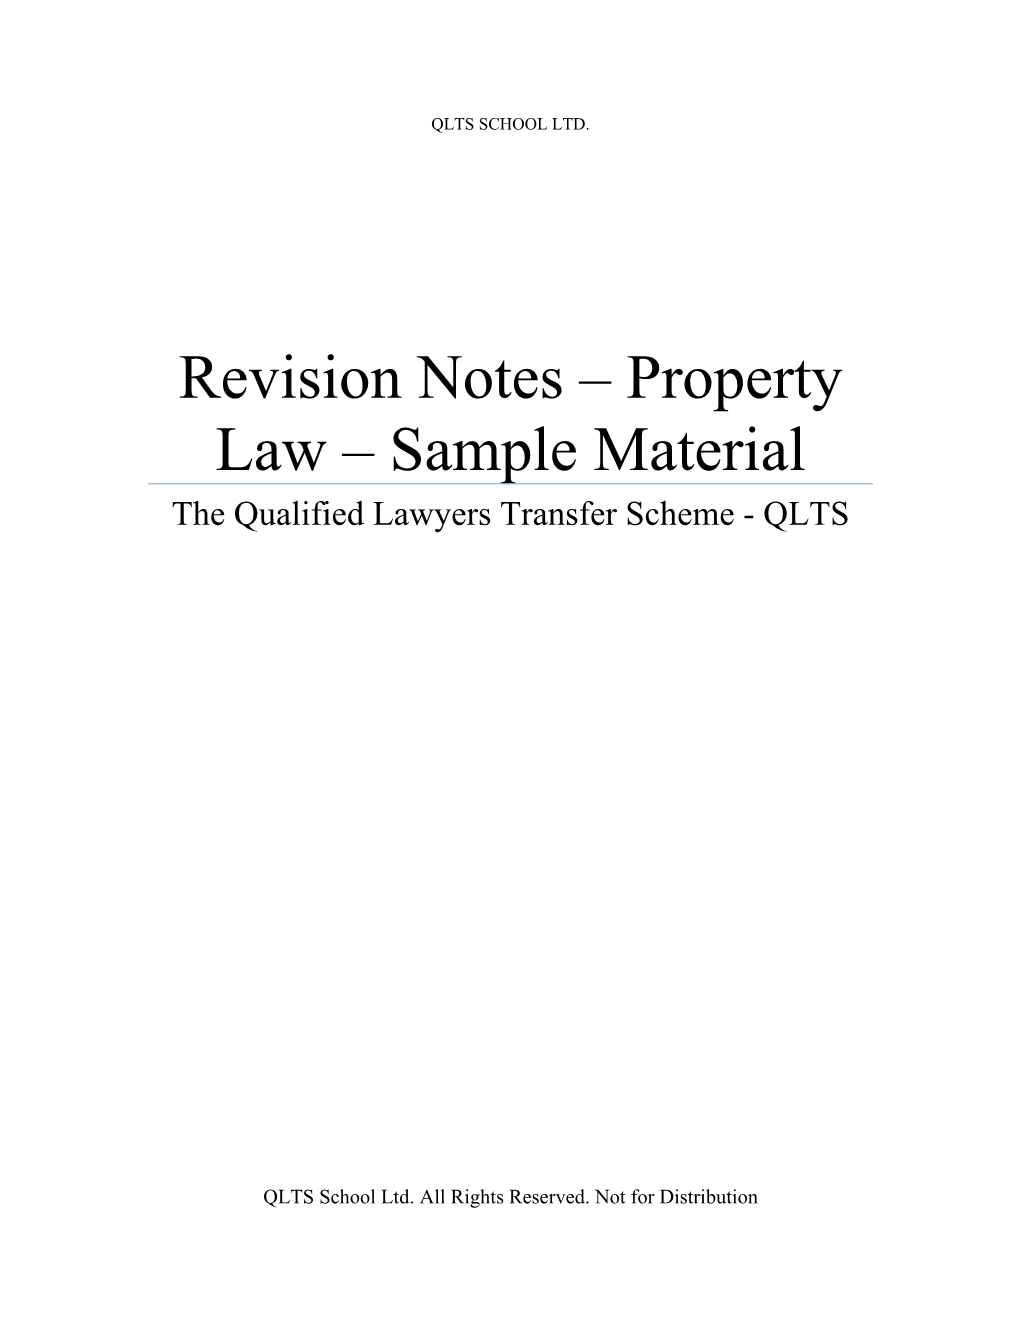 Revision Notes – Property Law – Sample Material the Qualified Lawyers Transfer Scheme - QLTS